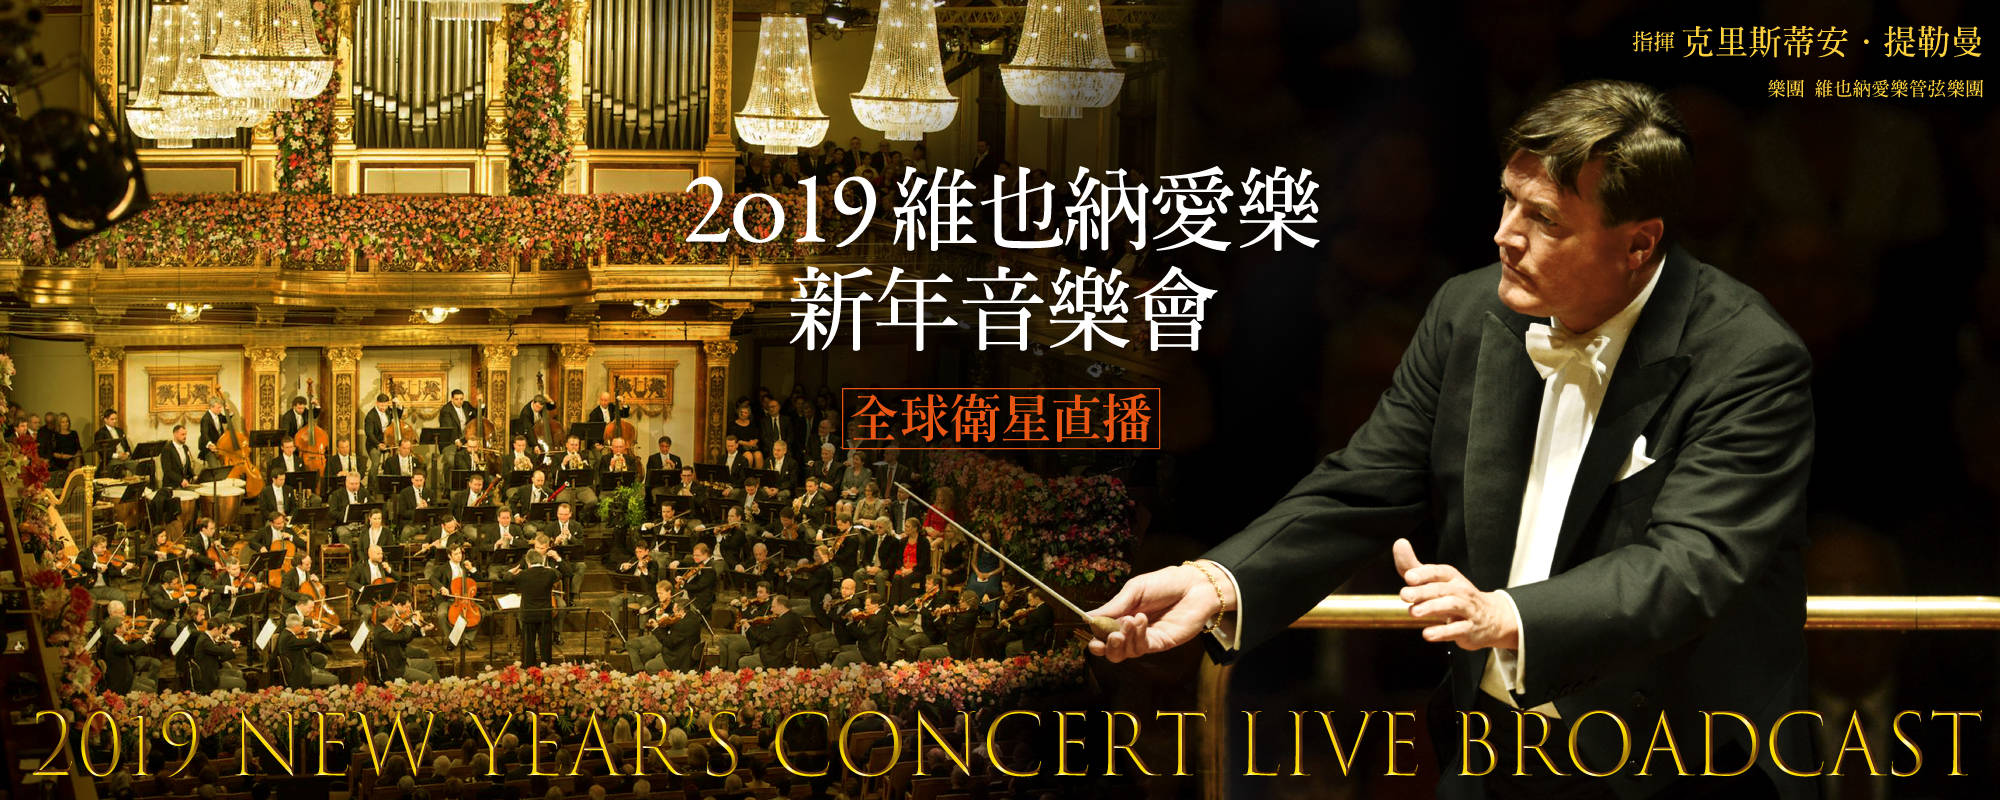 2019 New Year’s Concert Live Broadcast